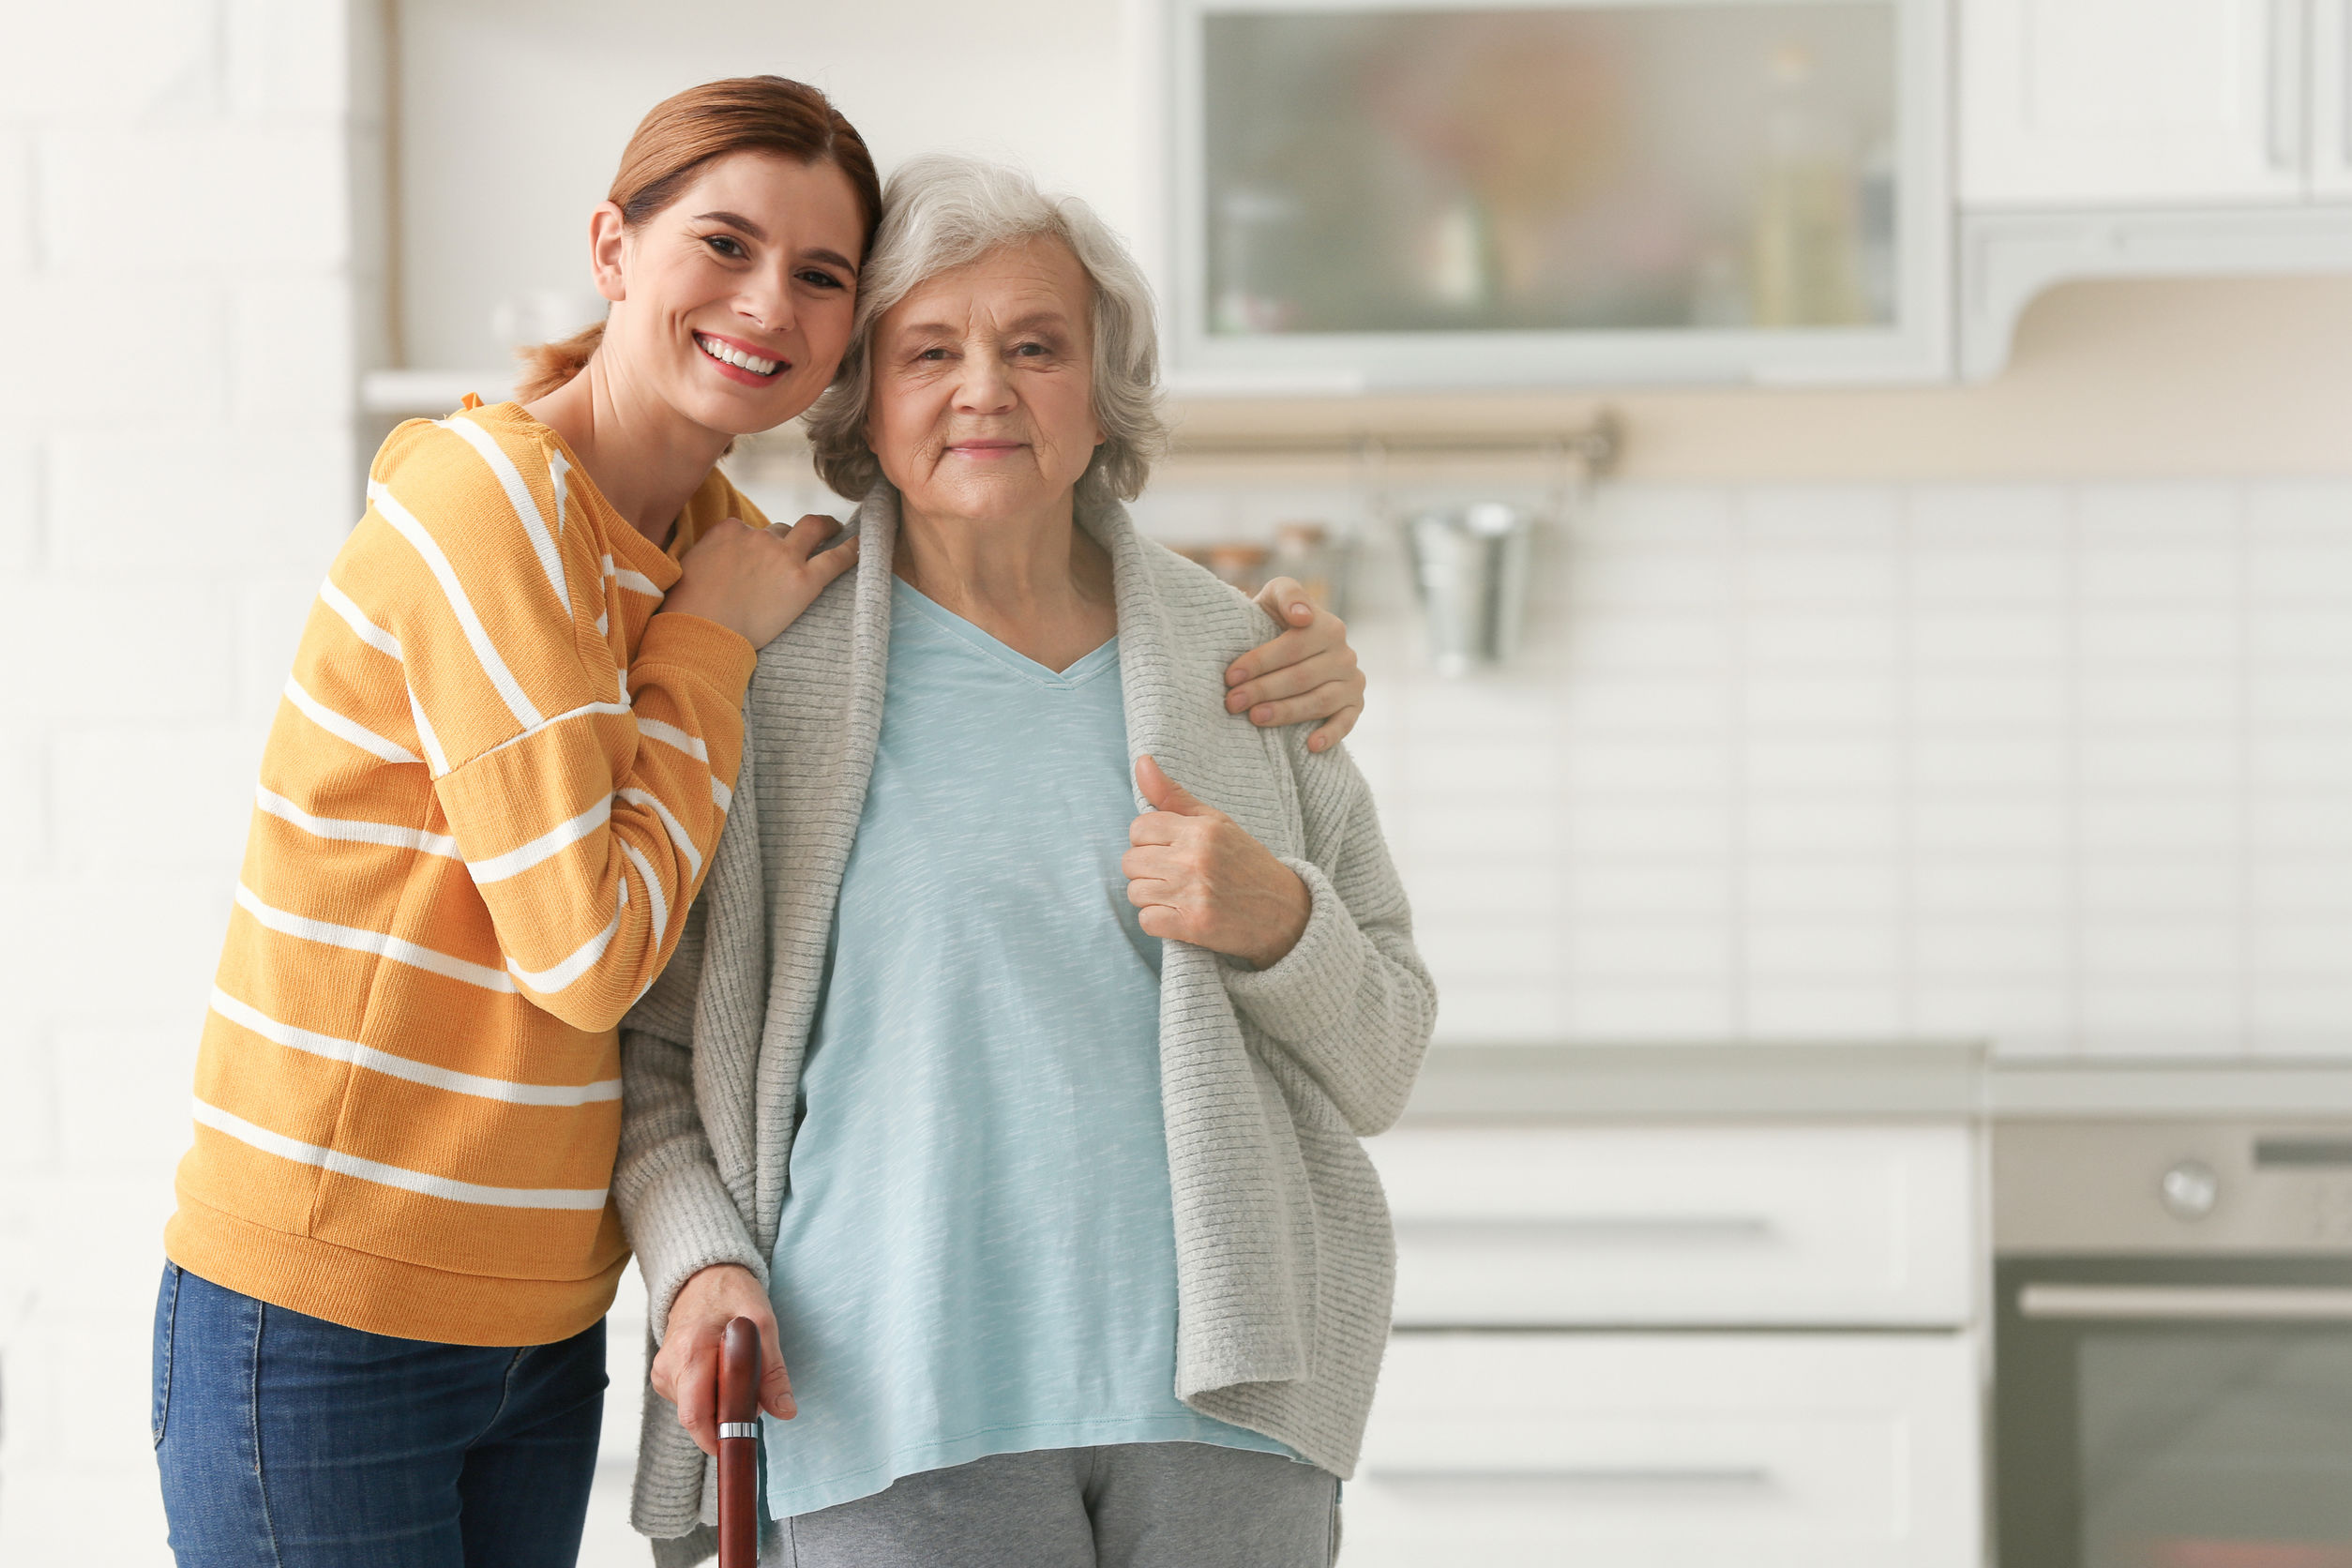 Personality Traits That Make a Great Caregiver